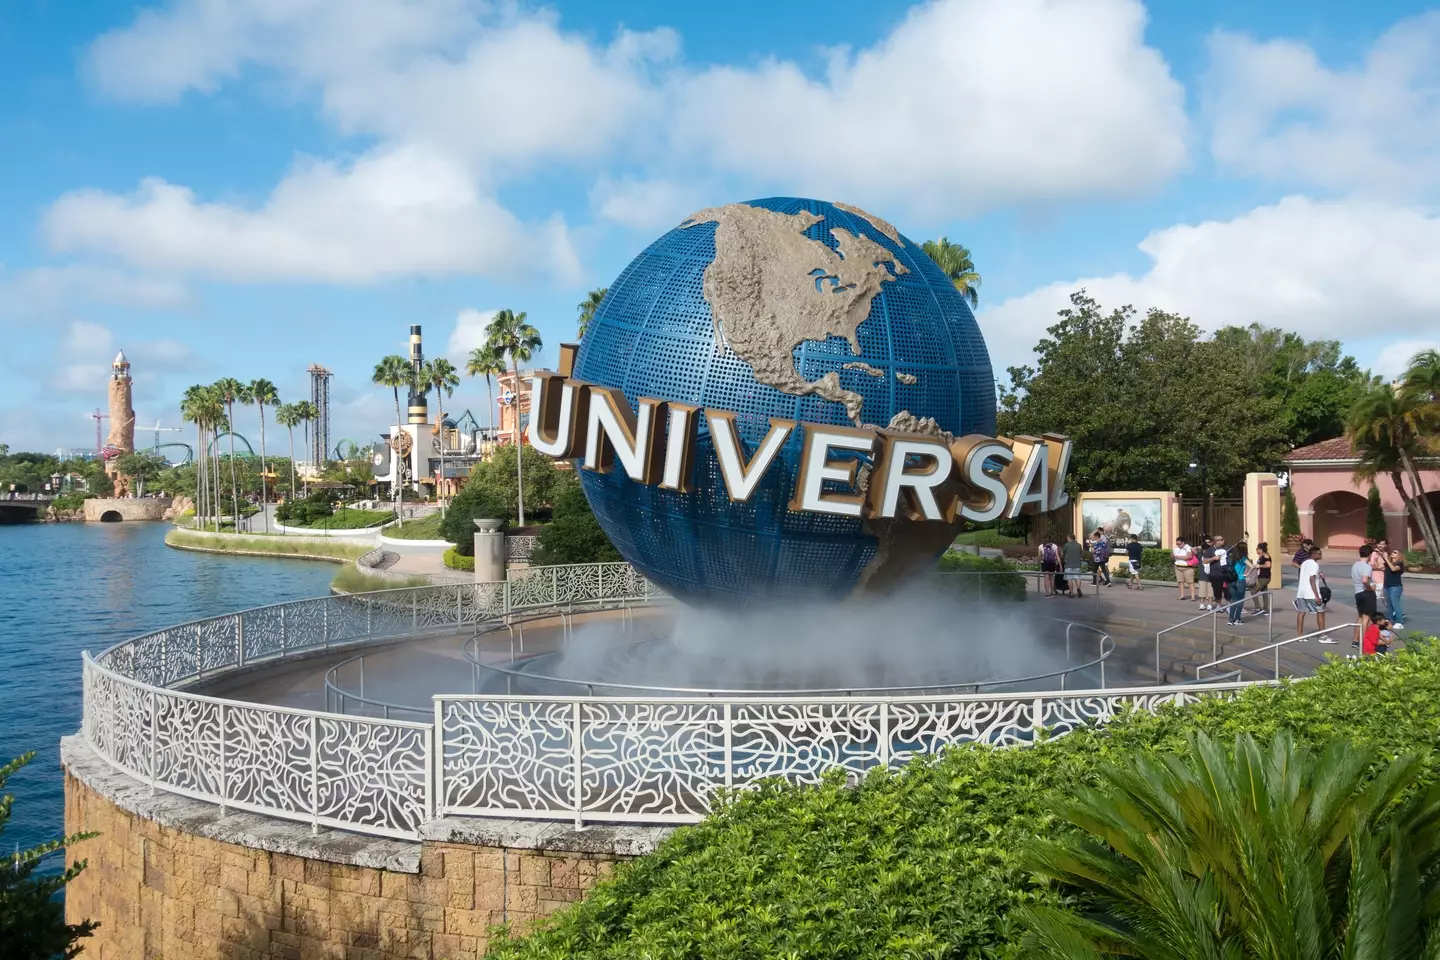 A trip to Universal Orlando will set you back an eye watering amount.